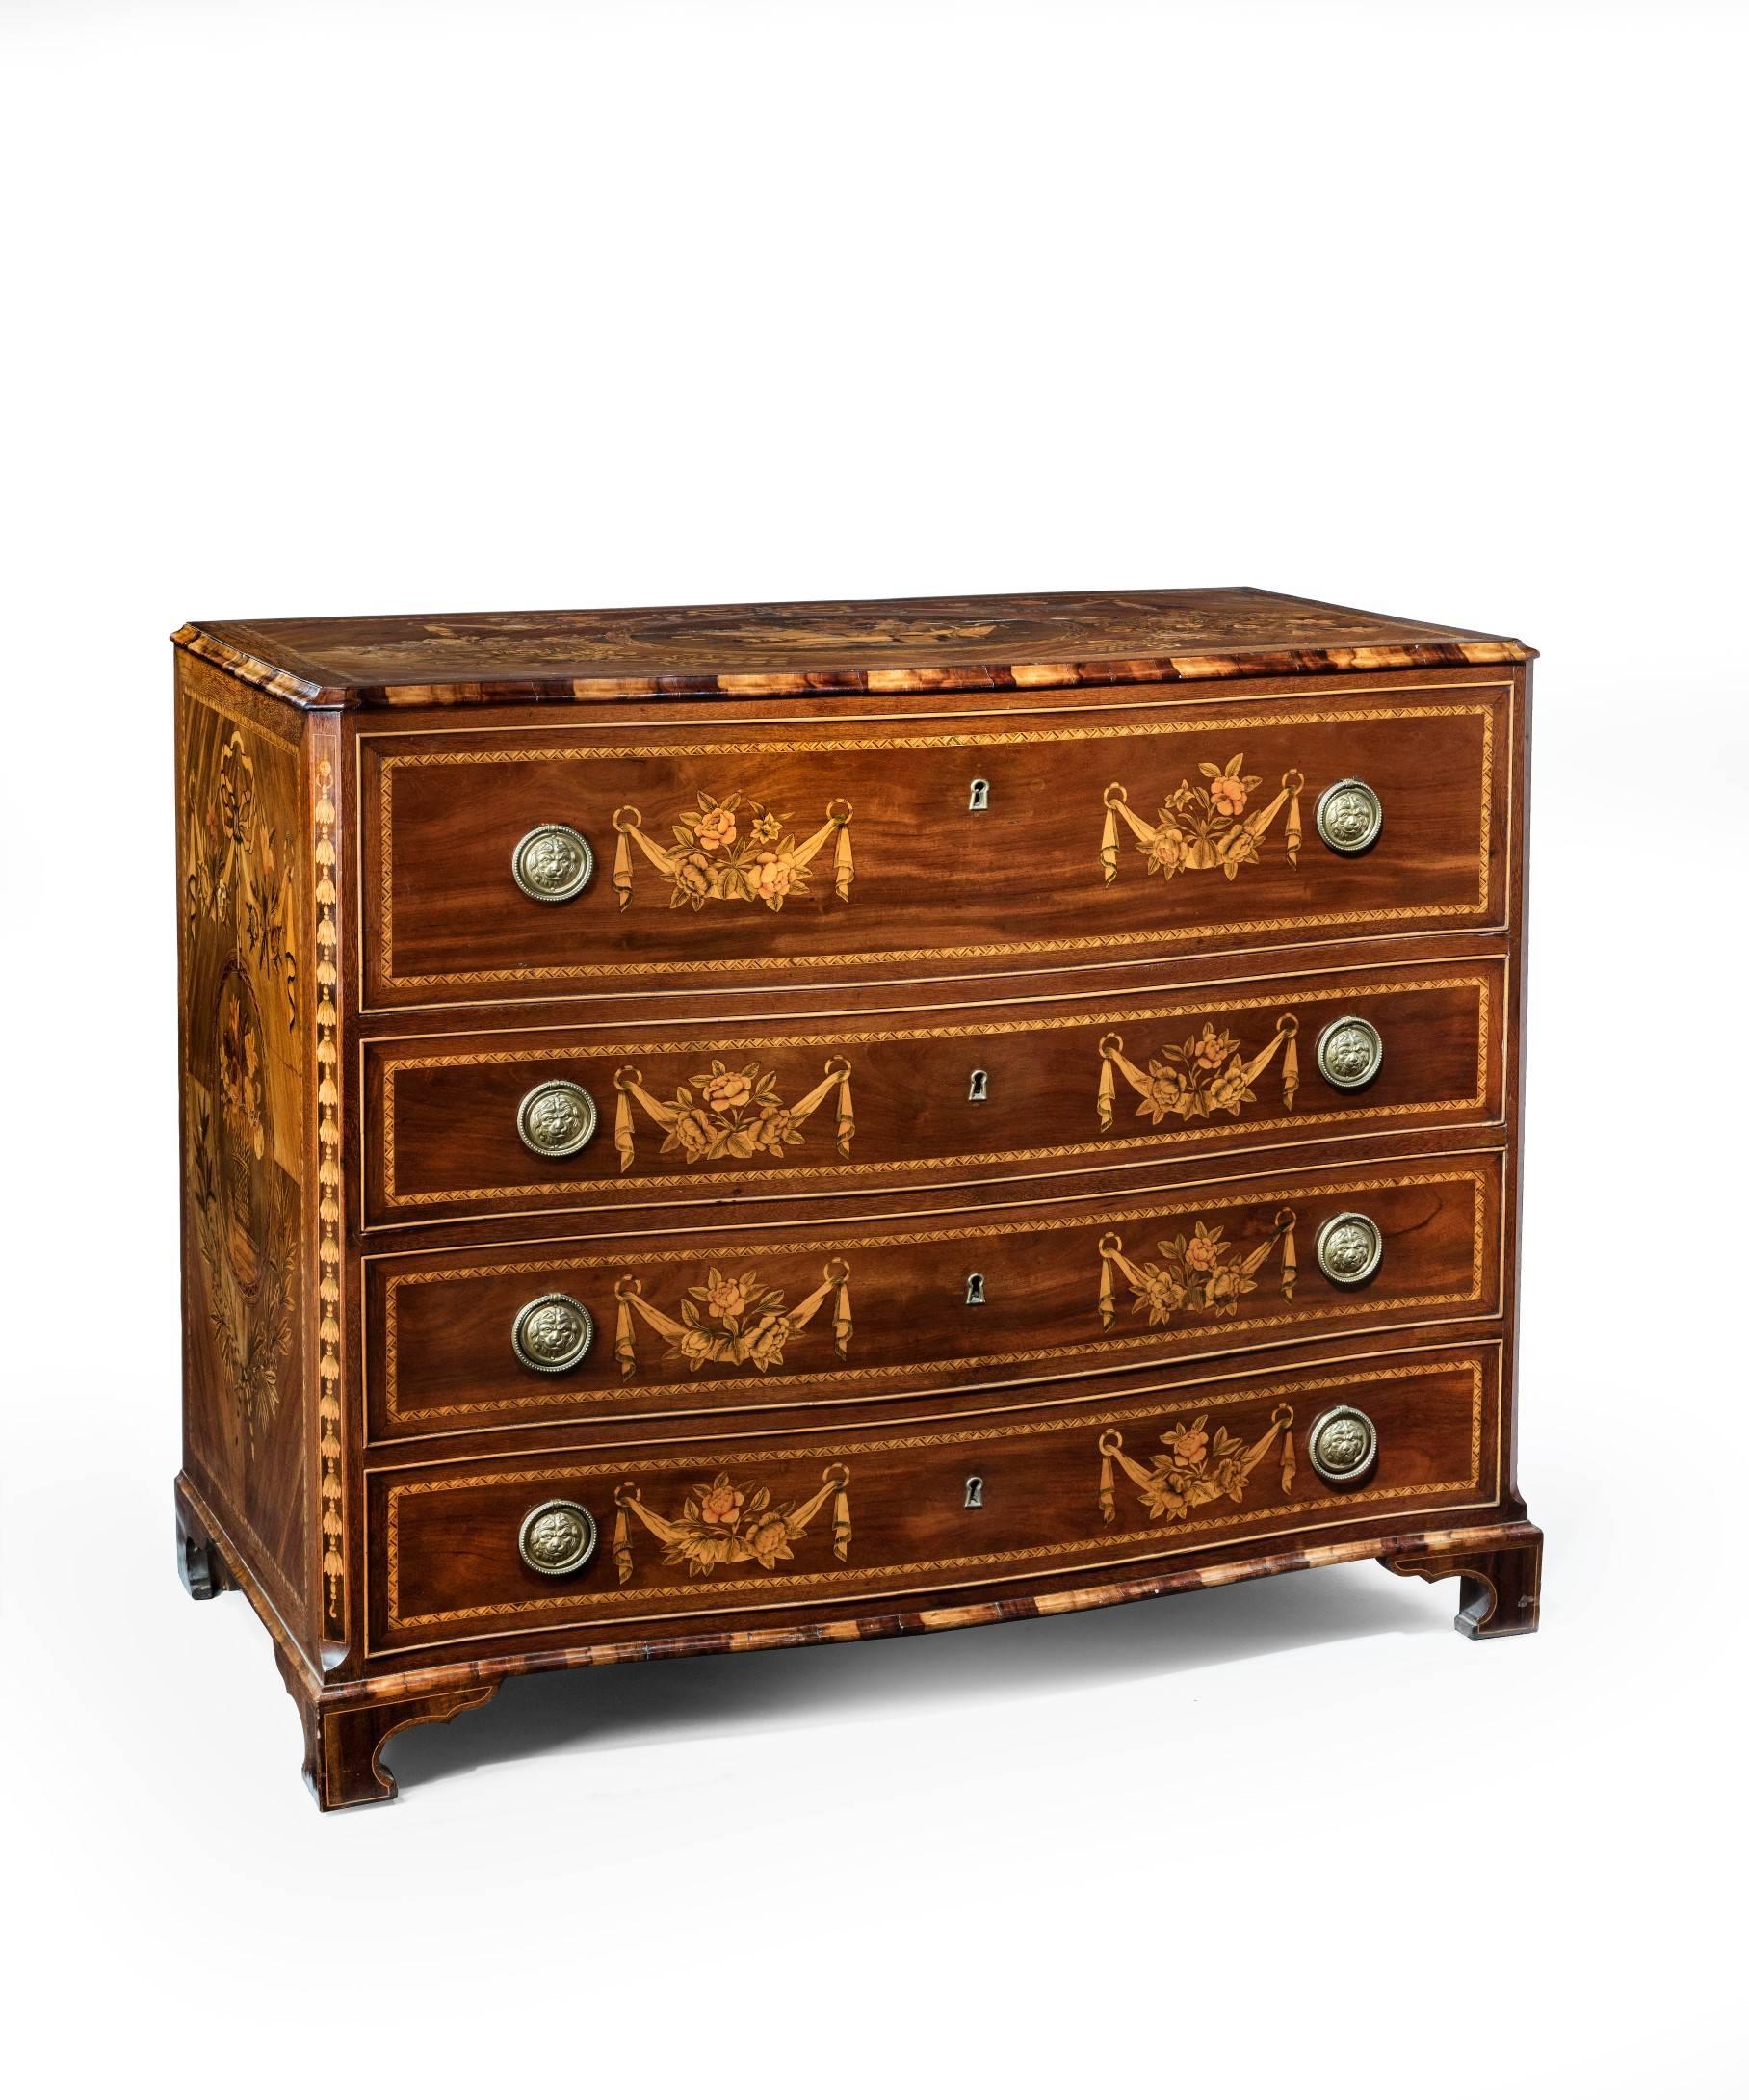 A magnificent pair of late 18th century continental walnut and marquetry serpentine fronted commodes, the top inlaid to the center with musical trophies (the other commode with military trophies) set within an oval laurel wreath border surrounded by